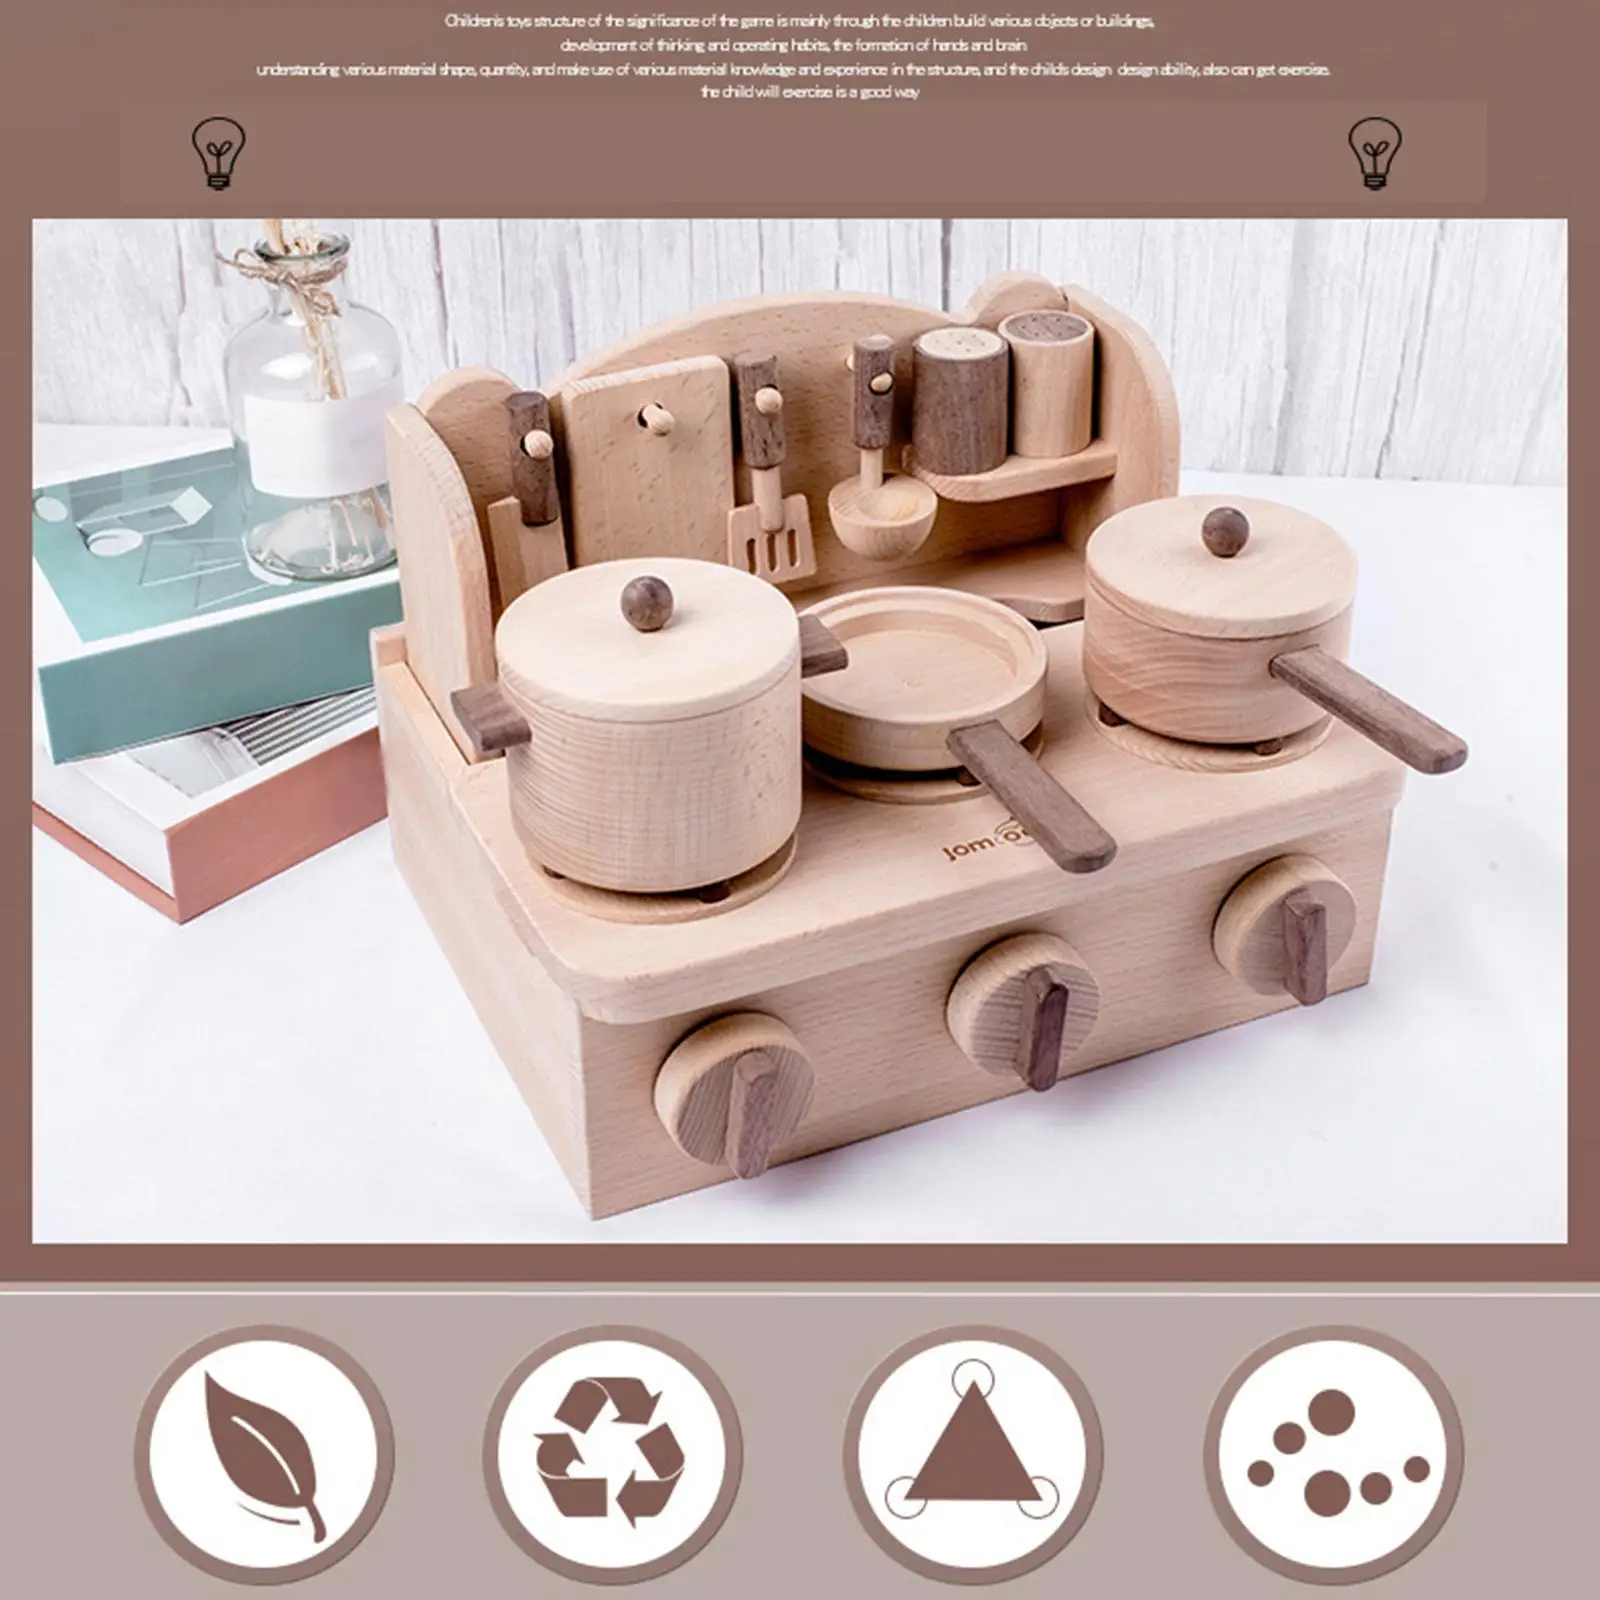 Wood Pretend Kitchen Playset Simulation Cooking Pots Pans Cooking Sets Realistic Setup Kitchen Play Toy Set for Ages 3+ Toddlers